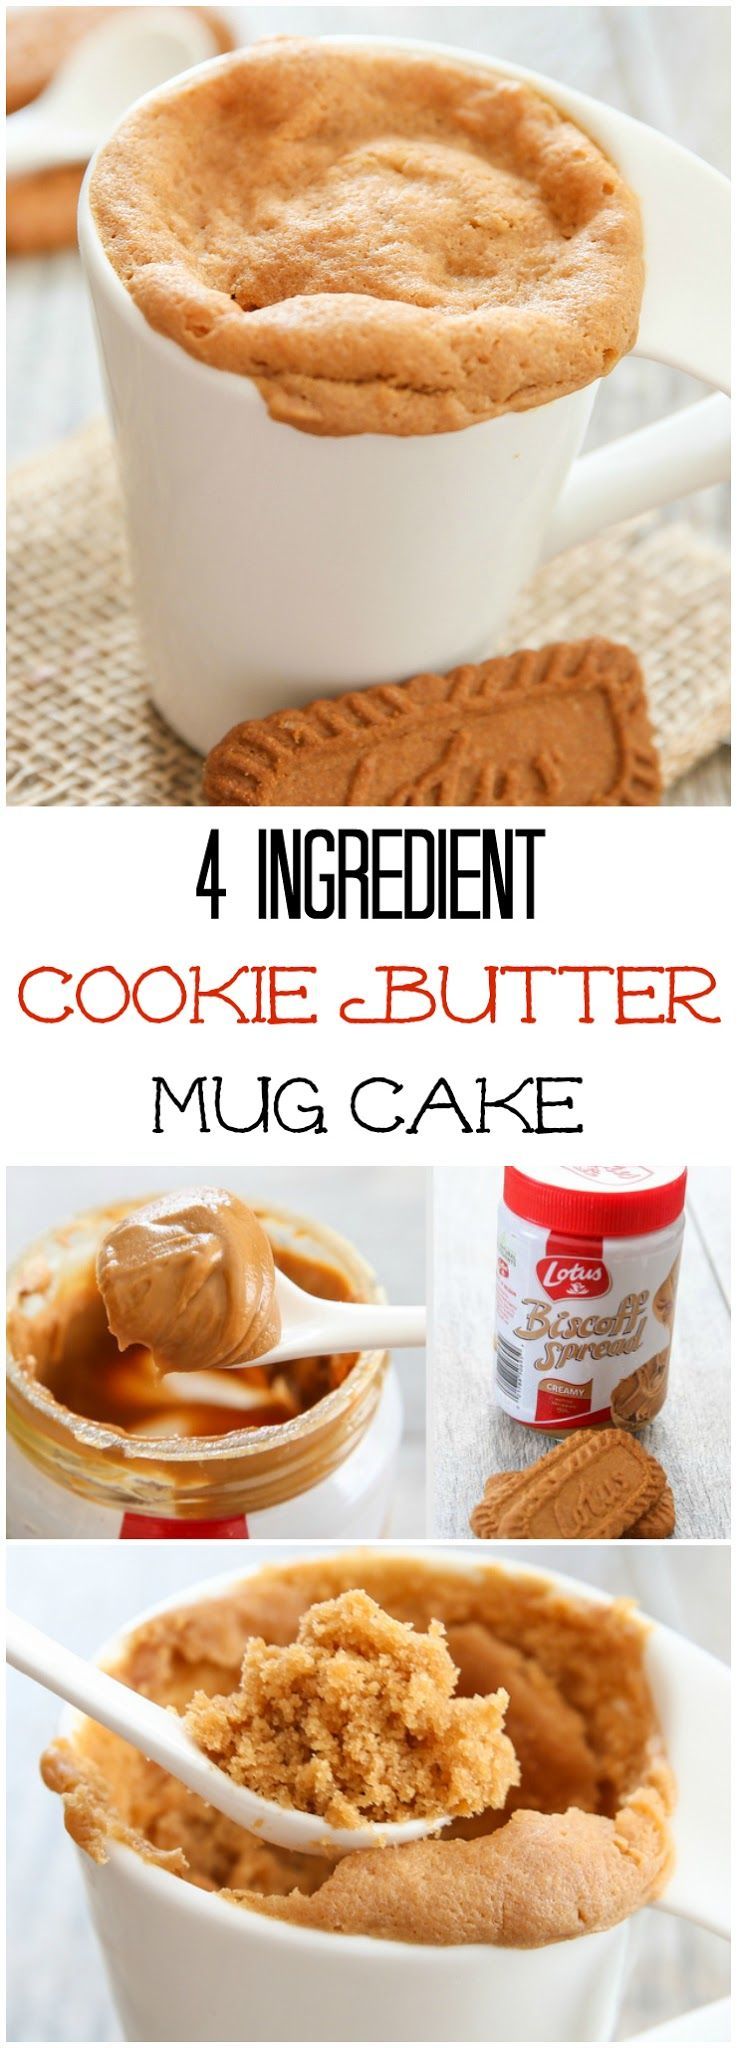 4 Ingredient Cookie Butter Mug Cake. This single serving microwave cake is ready in 5 minutes!